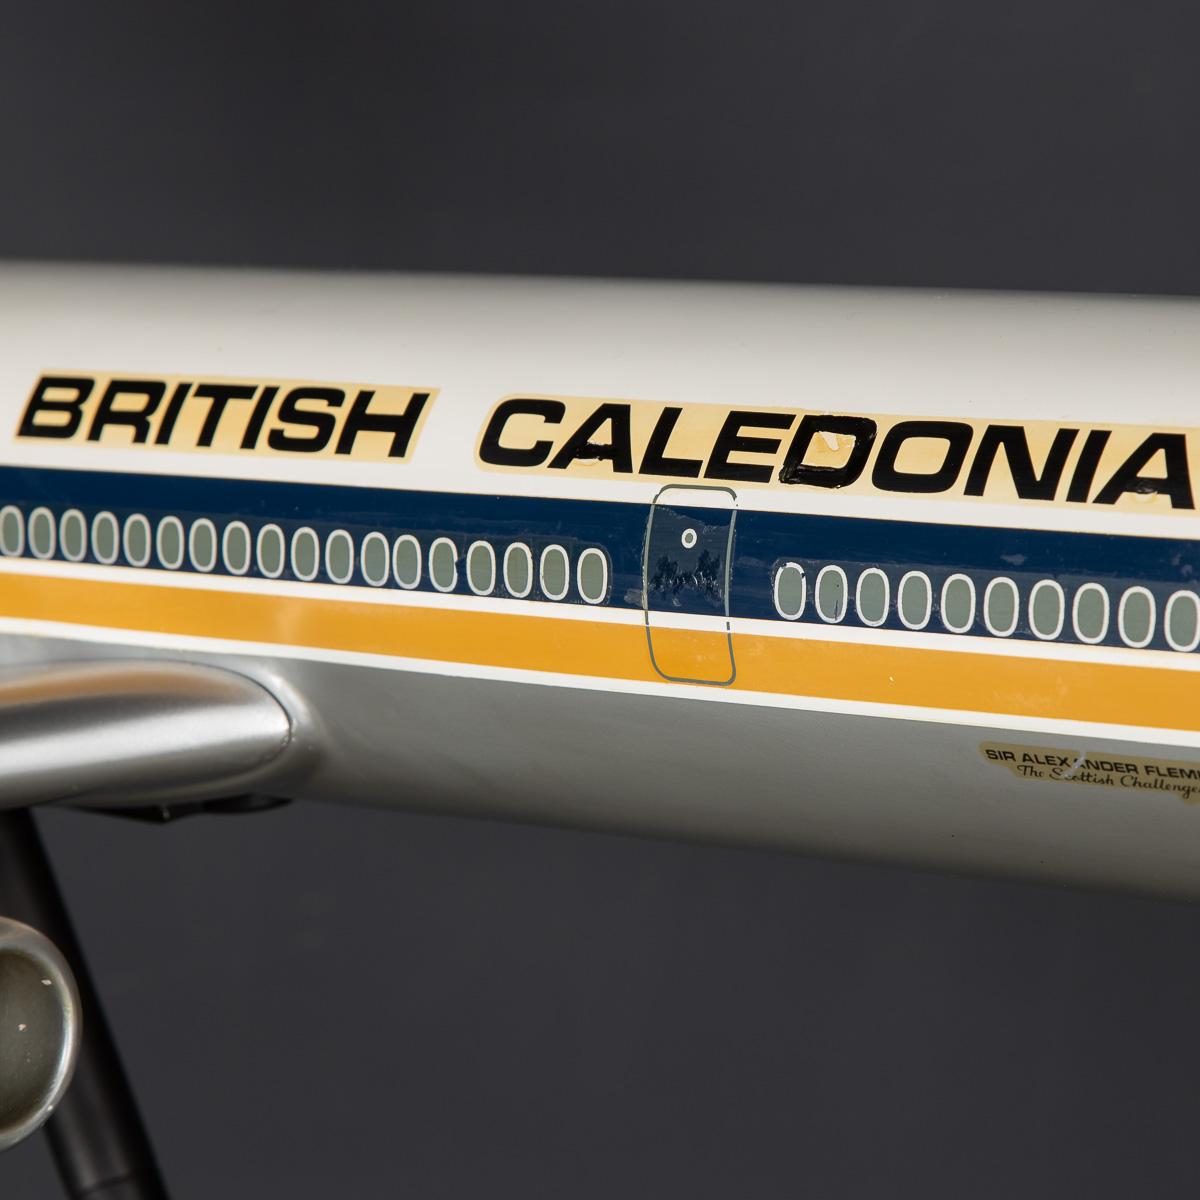 20th Century British Caledonian Dc10 Fibre Glass Airplane Model, c.1970 For Sale 5